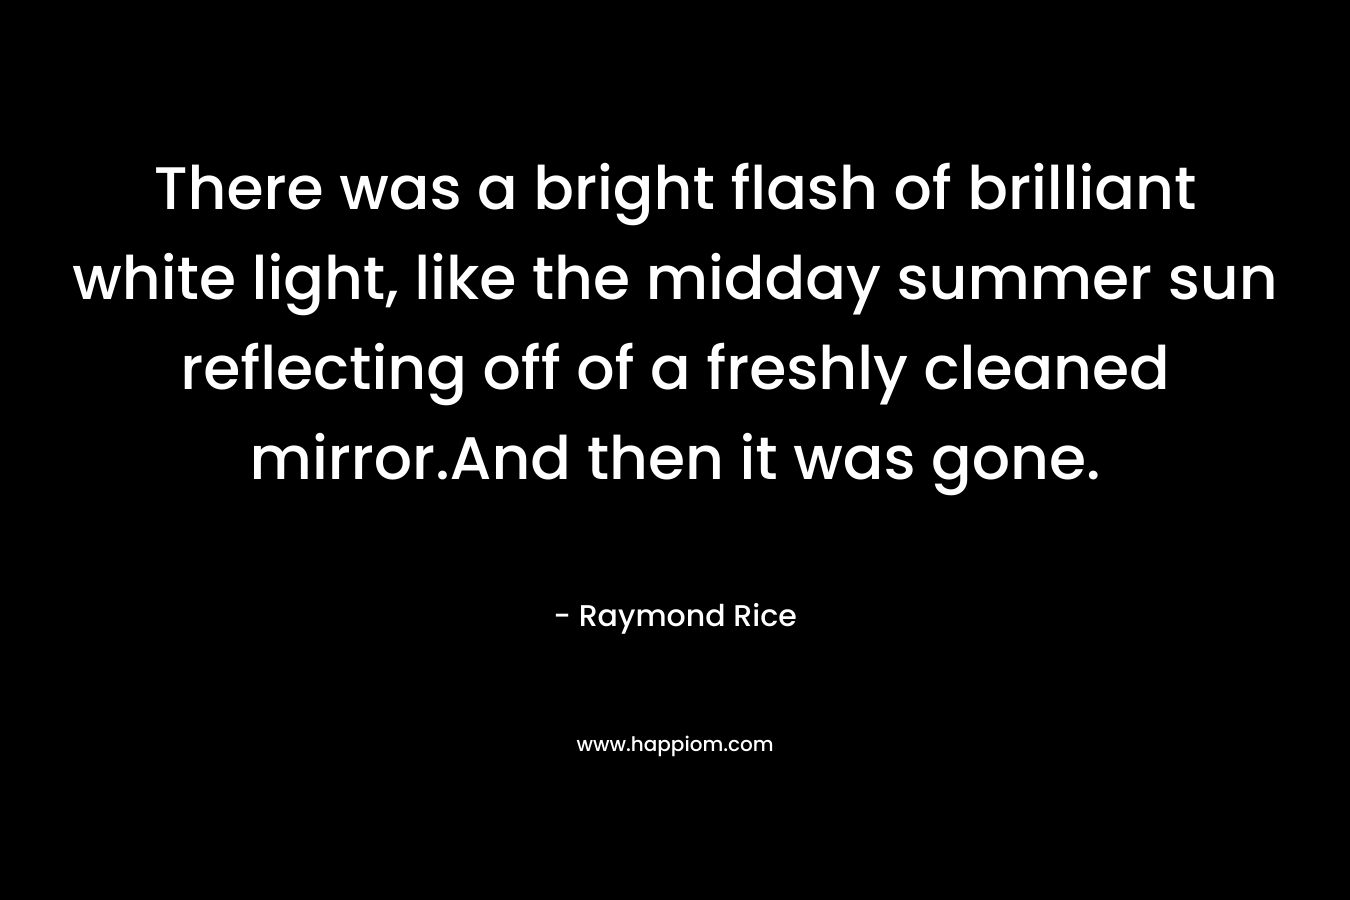 There was a bright flash of brilliant white light, like the midday summer sun reflecting off of a freshly cleaned mirror.And then it was gone. – Raymond Rice